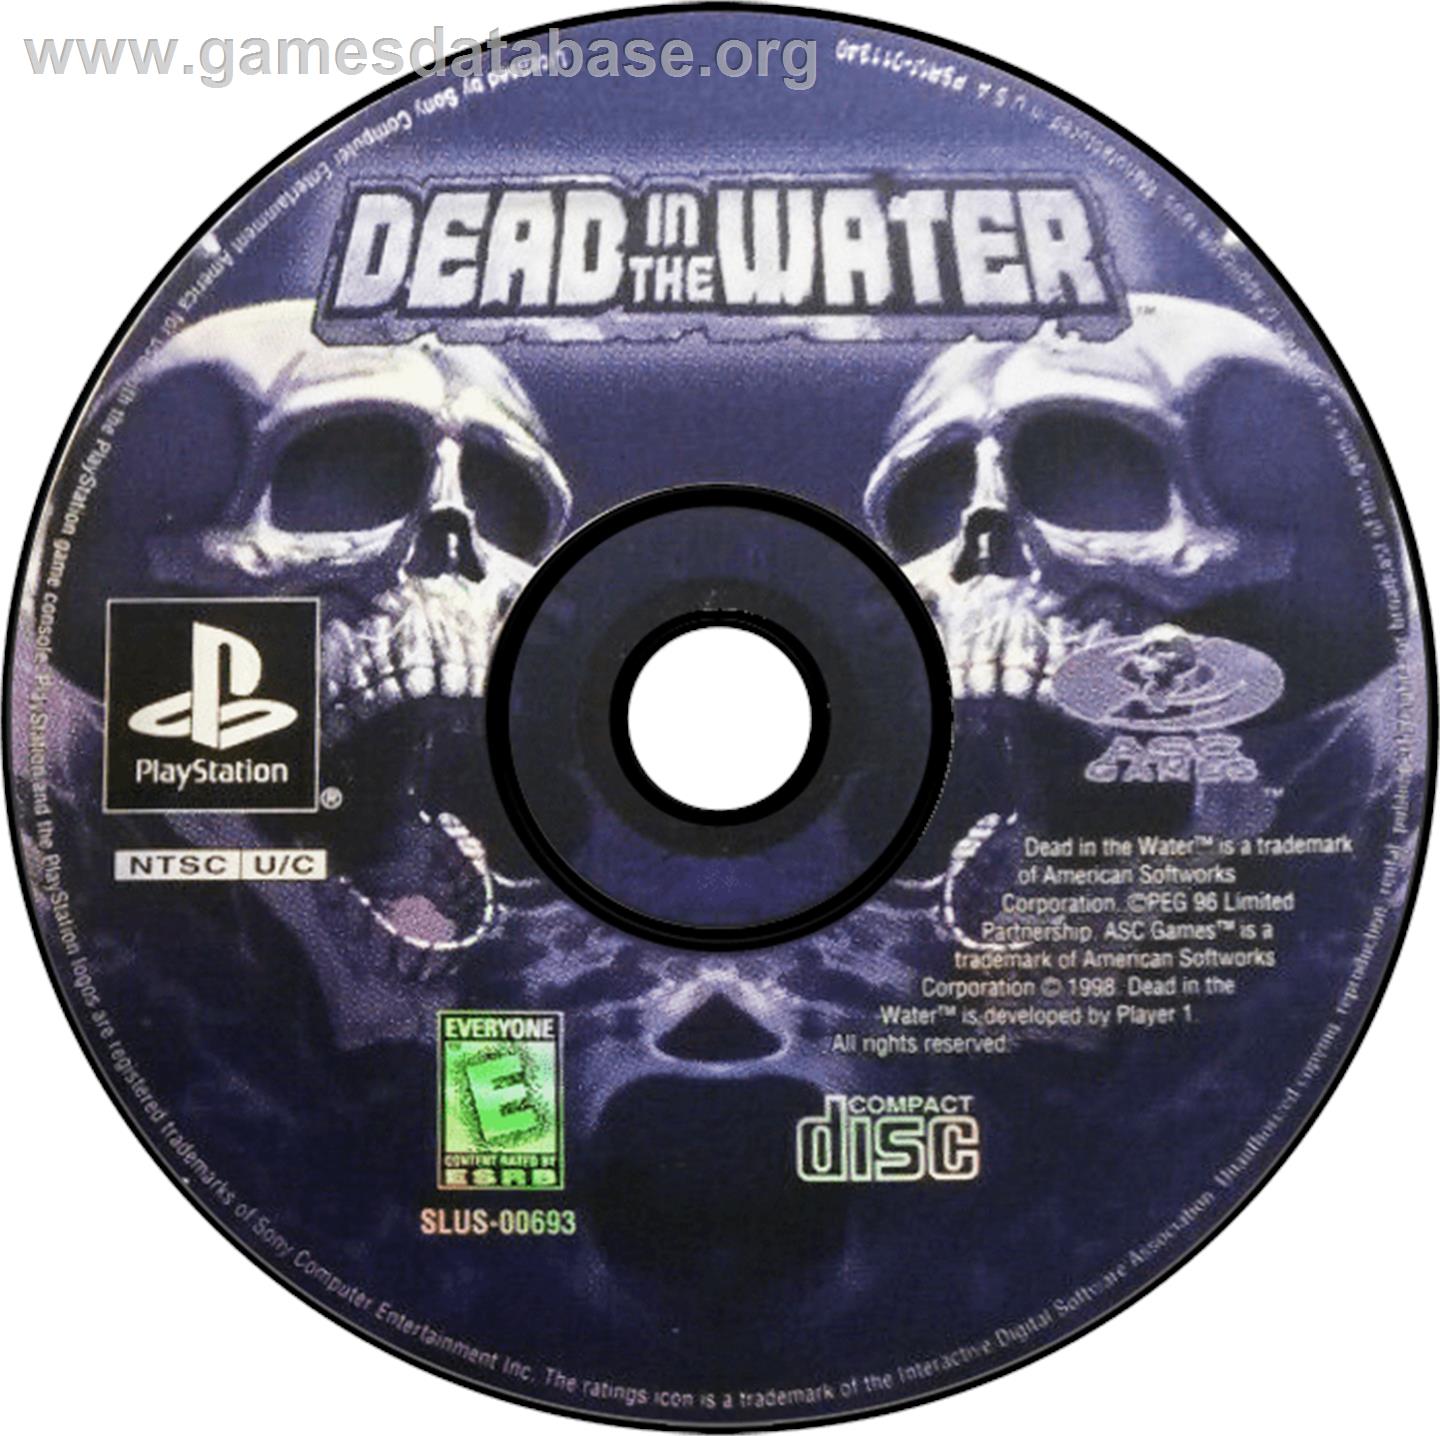 Dead in the Water - Sony Playstation - Artwork - Disc